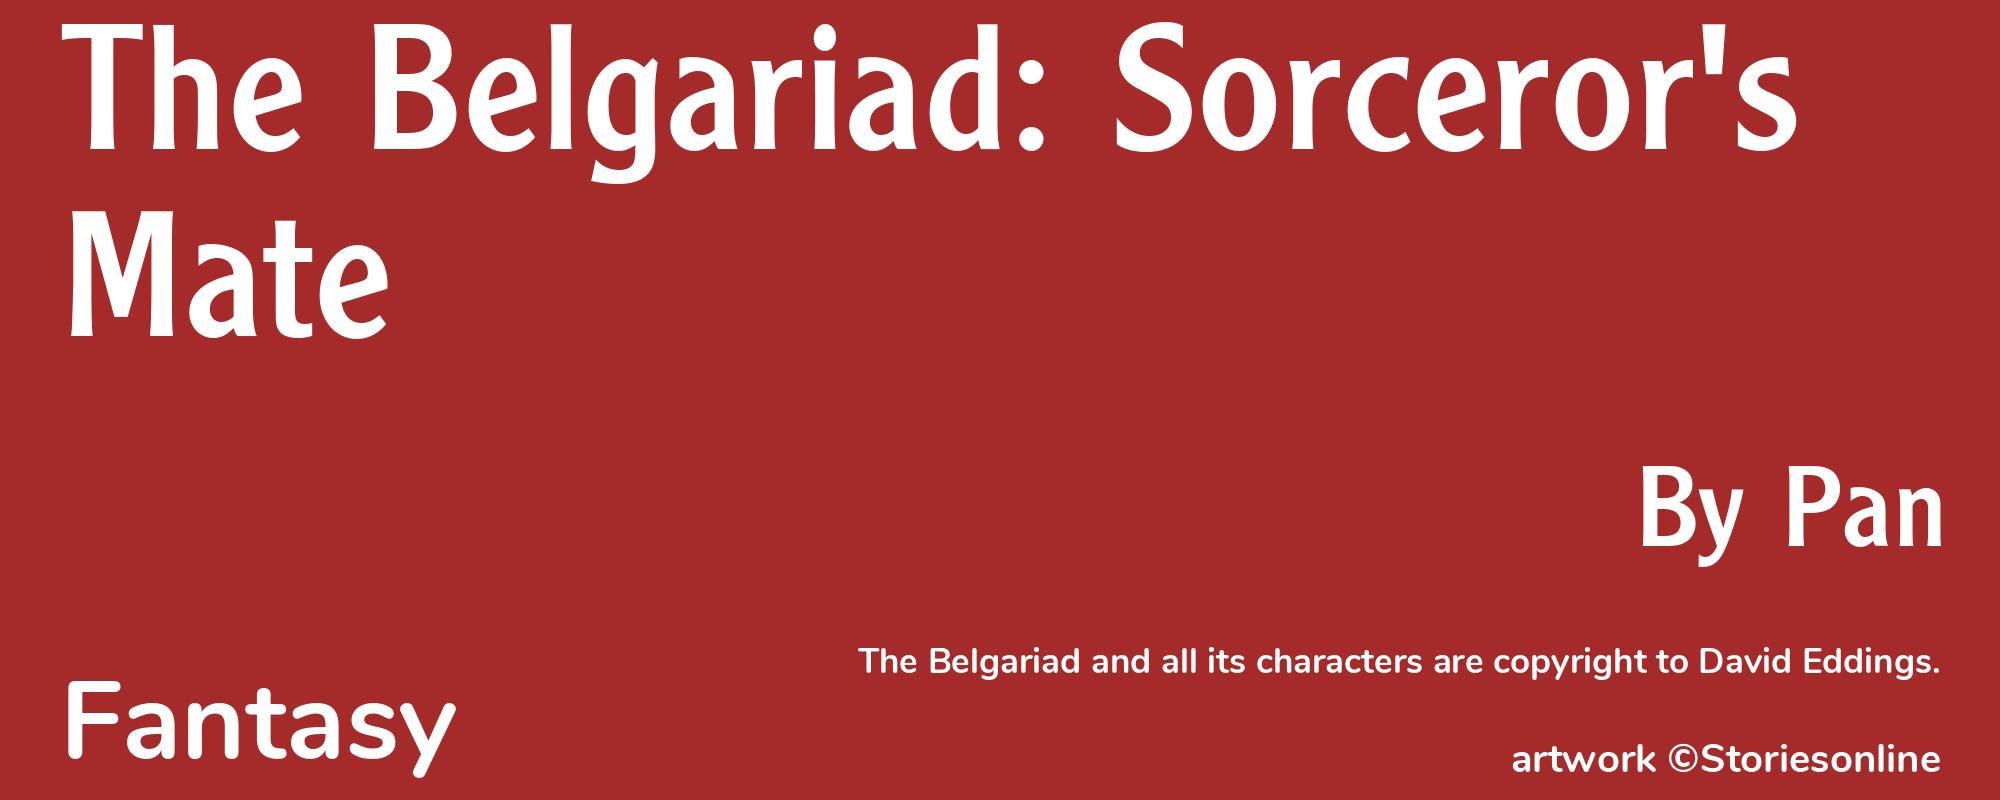 The Belgariad: Sorceror's Mate - Cover